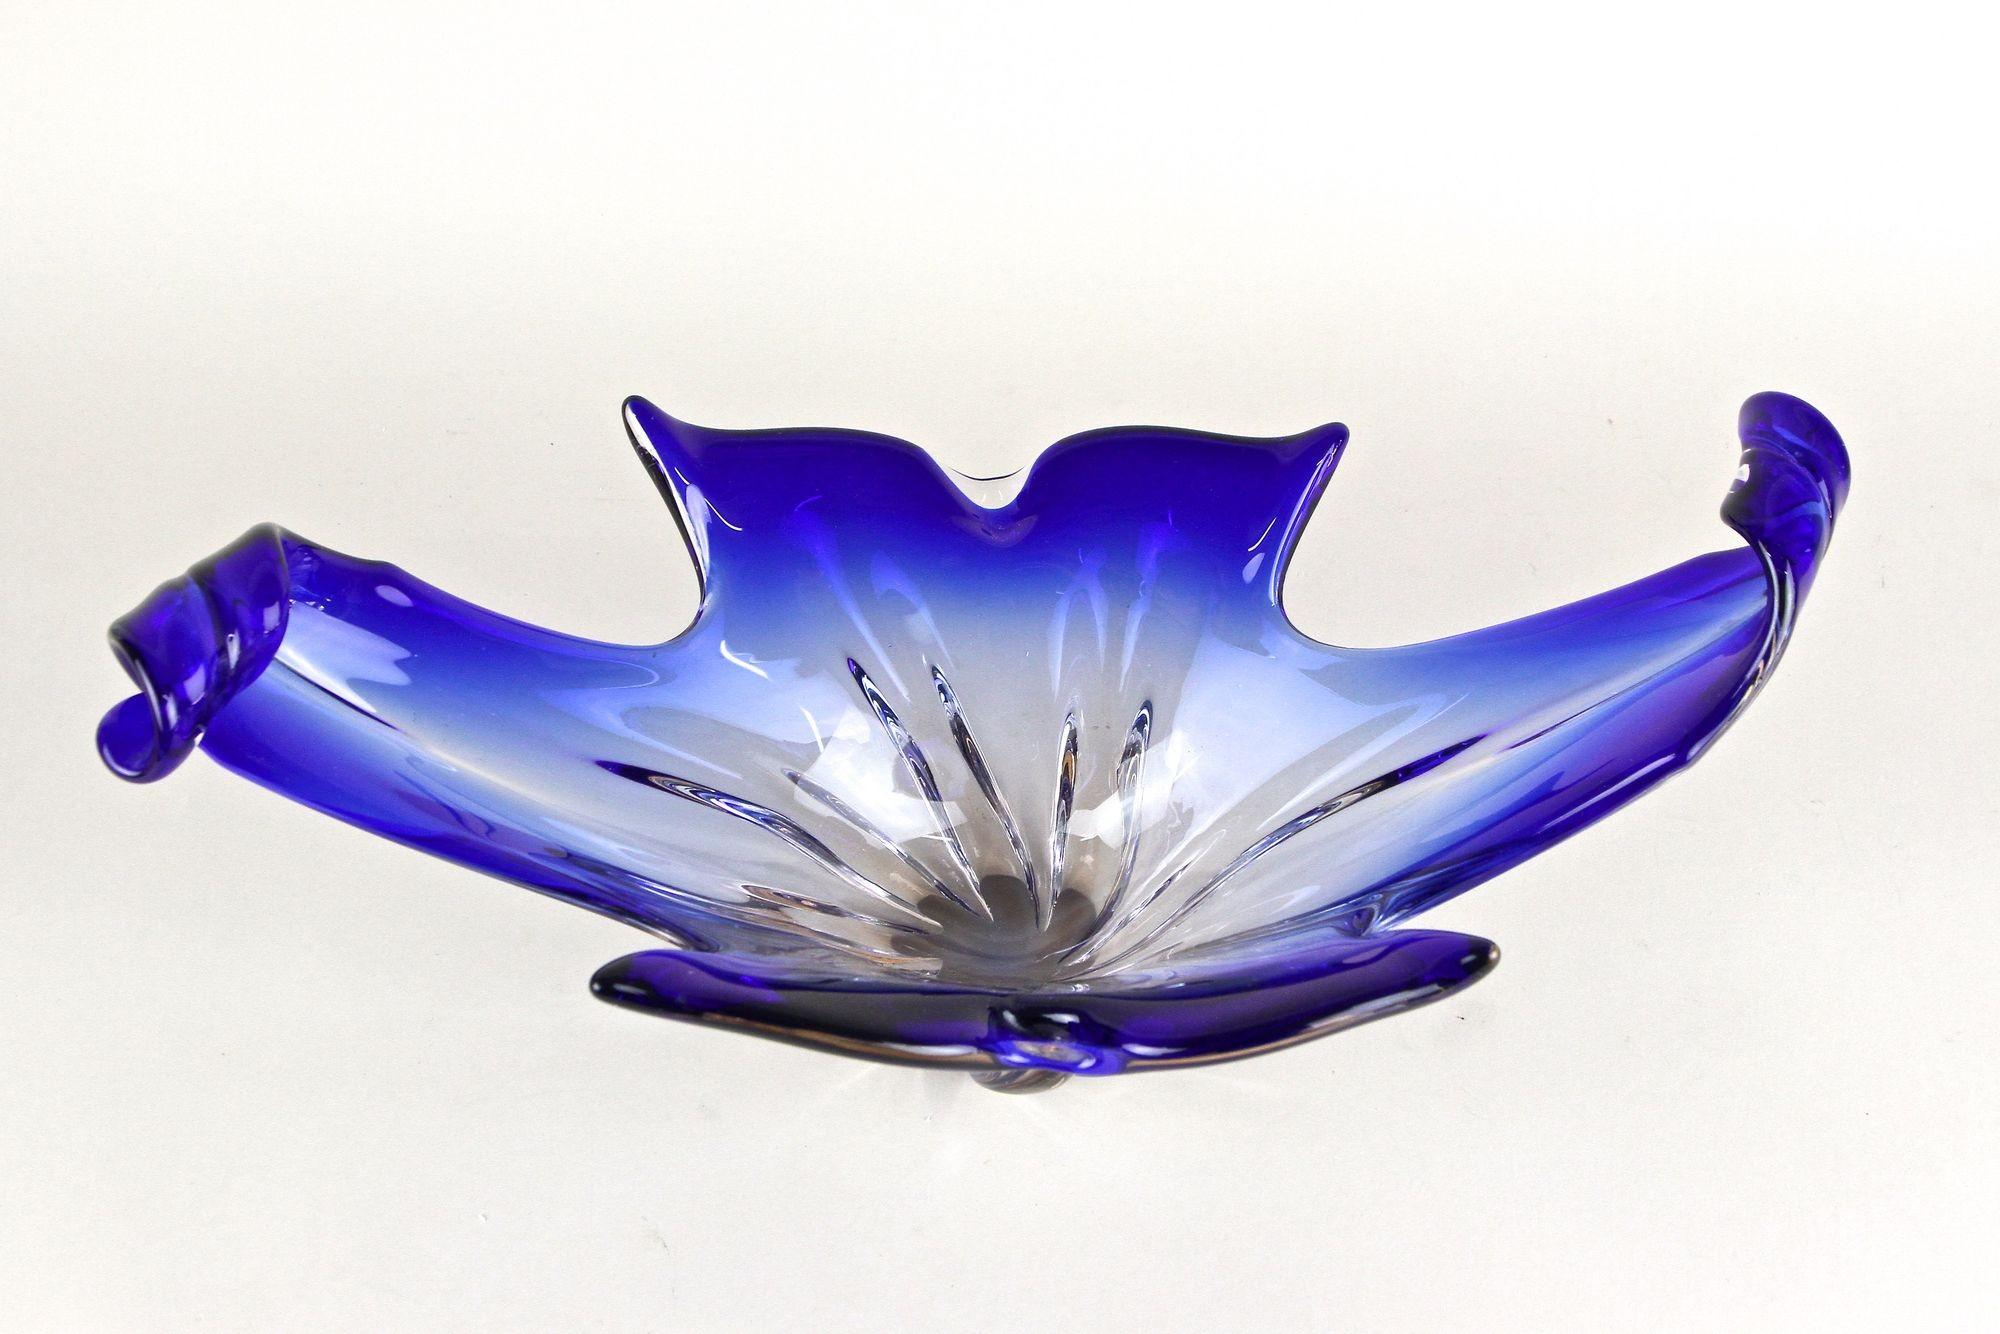 Superb large blue Murano glass bowl out of the famous workshops in Venice/ Italy from the late mid century around 1960/70. Impressing with its extraordinary shape - just see the gorgeous curled ends - and amazing coloration in gorgeous blue tones,